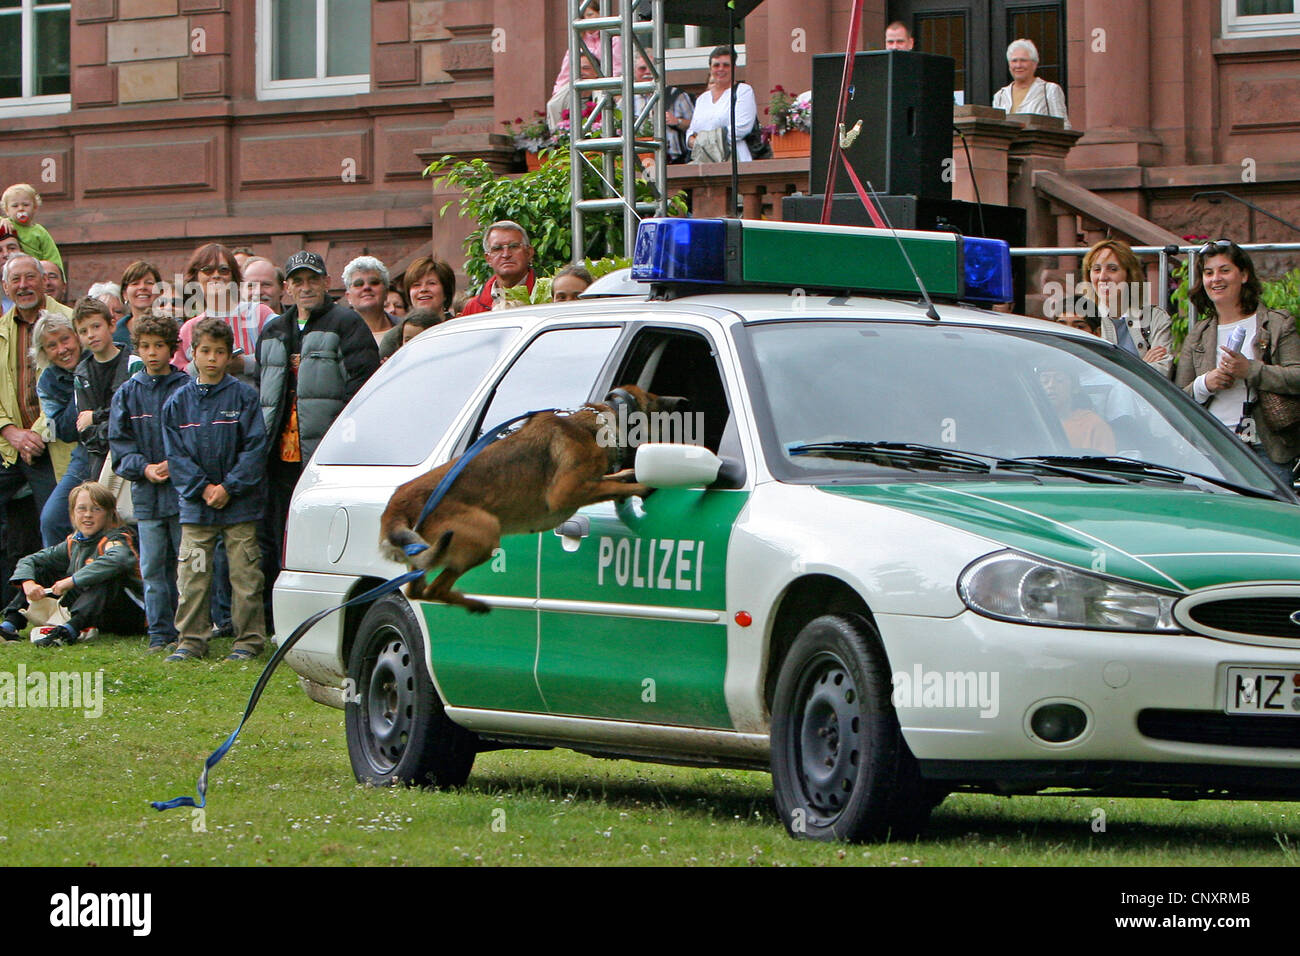 Malinois (Canis lupus f. familiaris), police dog jumping into the open window of a police car at a public demonstration in a park Stock Photo